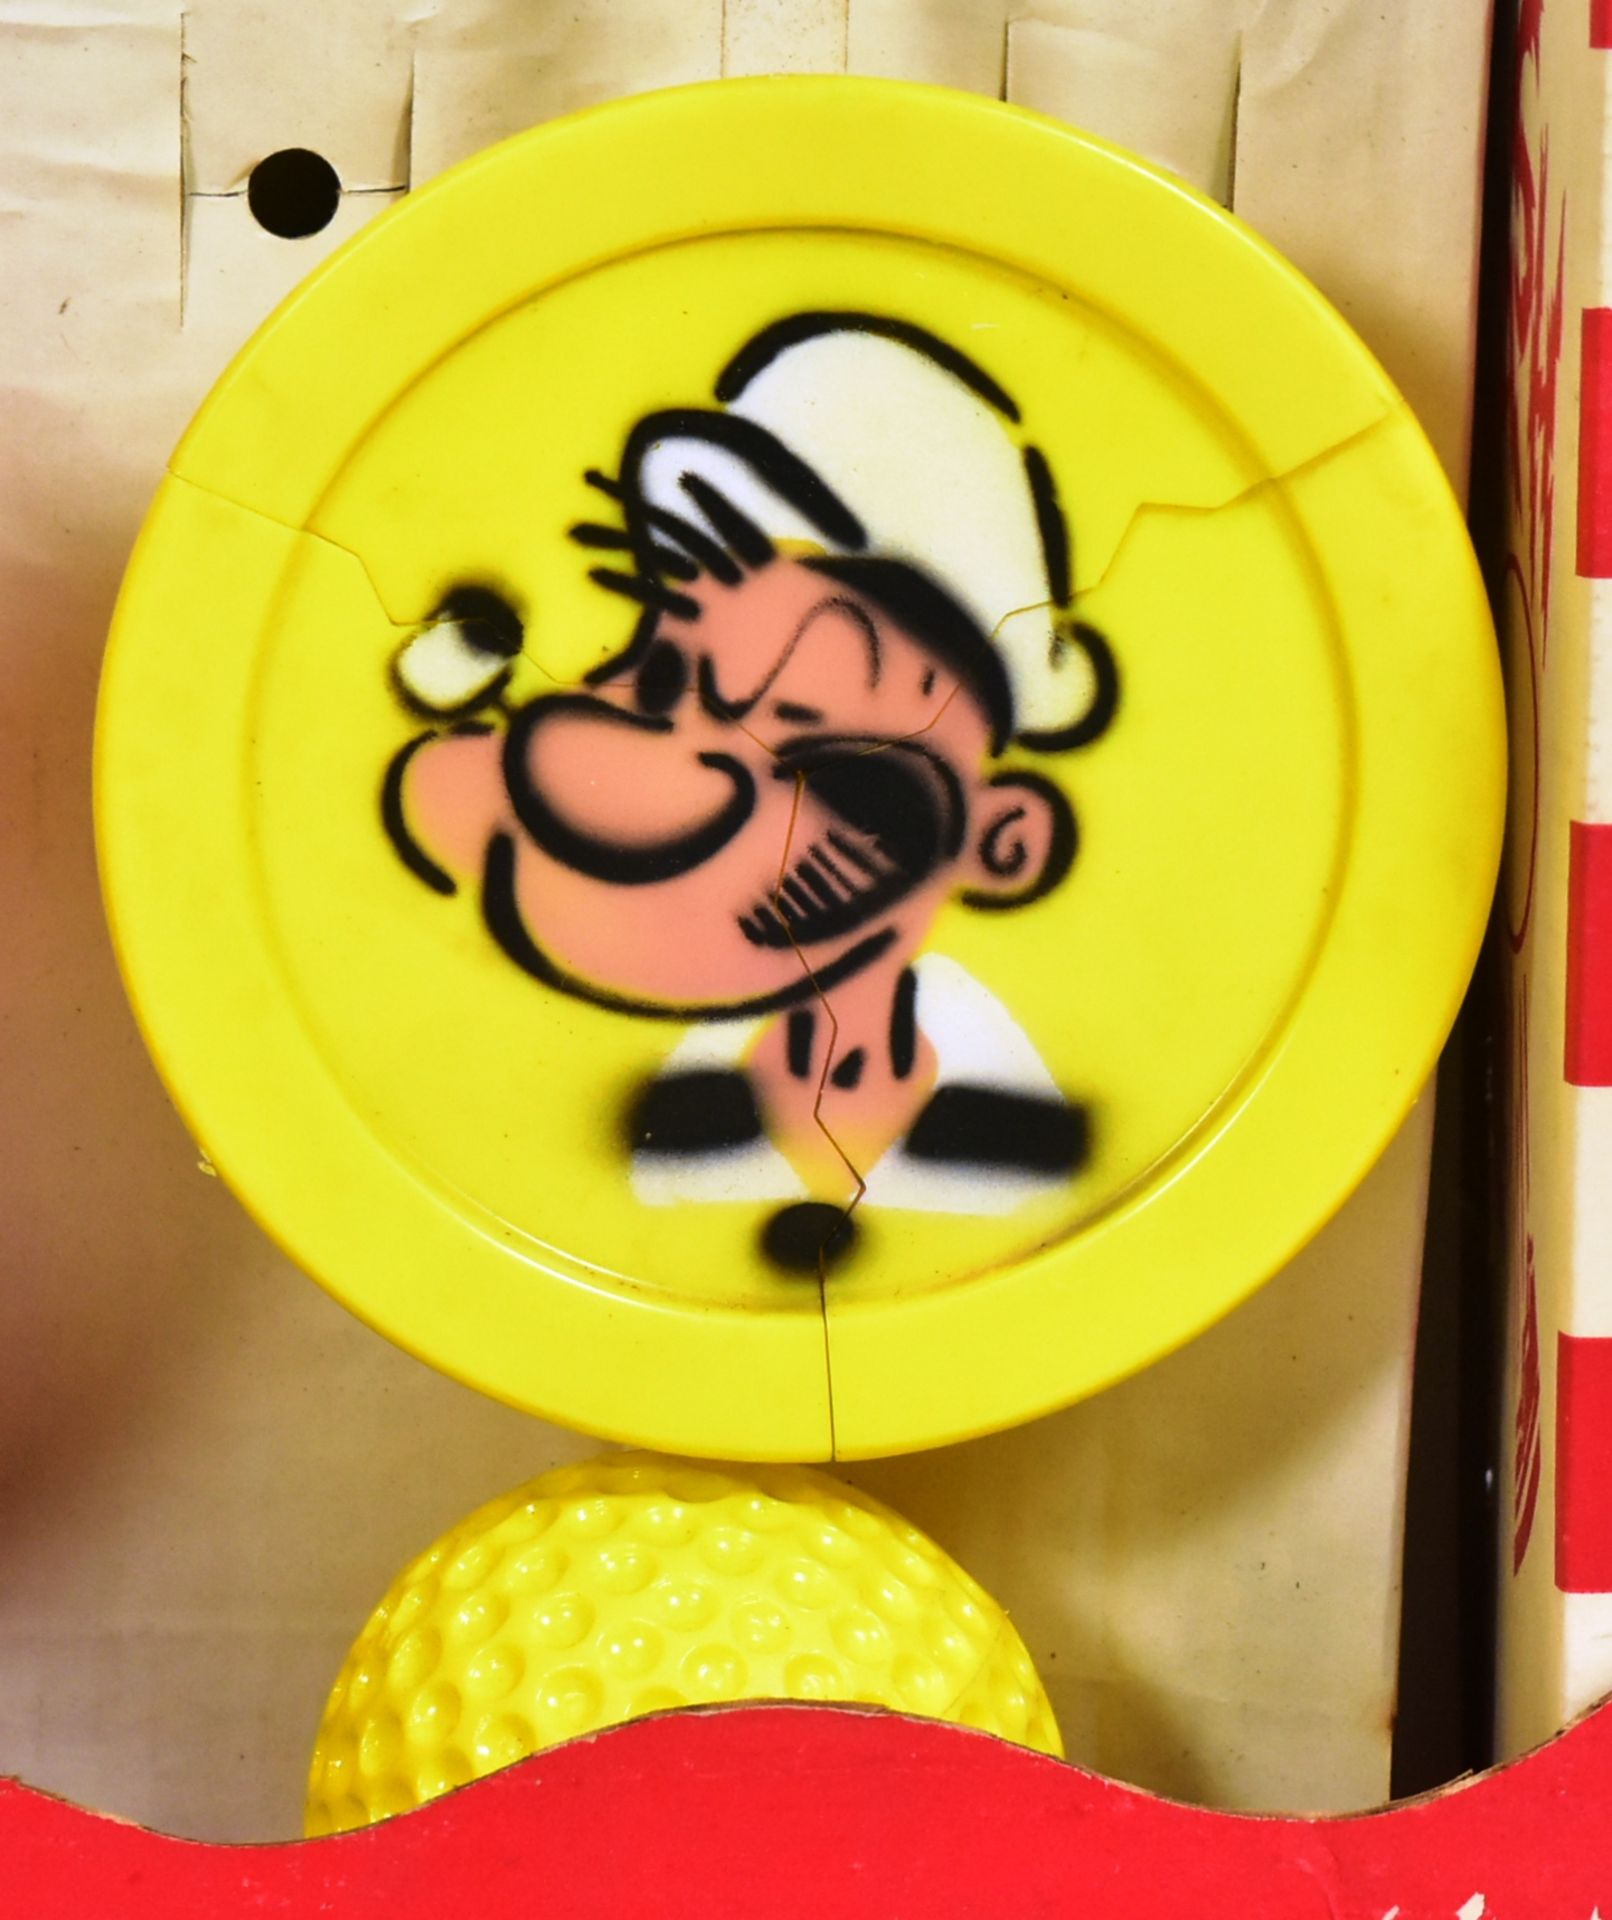 POPEYE - VINTAGE COMBEX POPEYE BREAK A PLATE GAME - Image 5 of 5